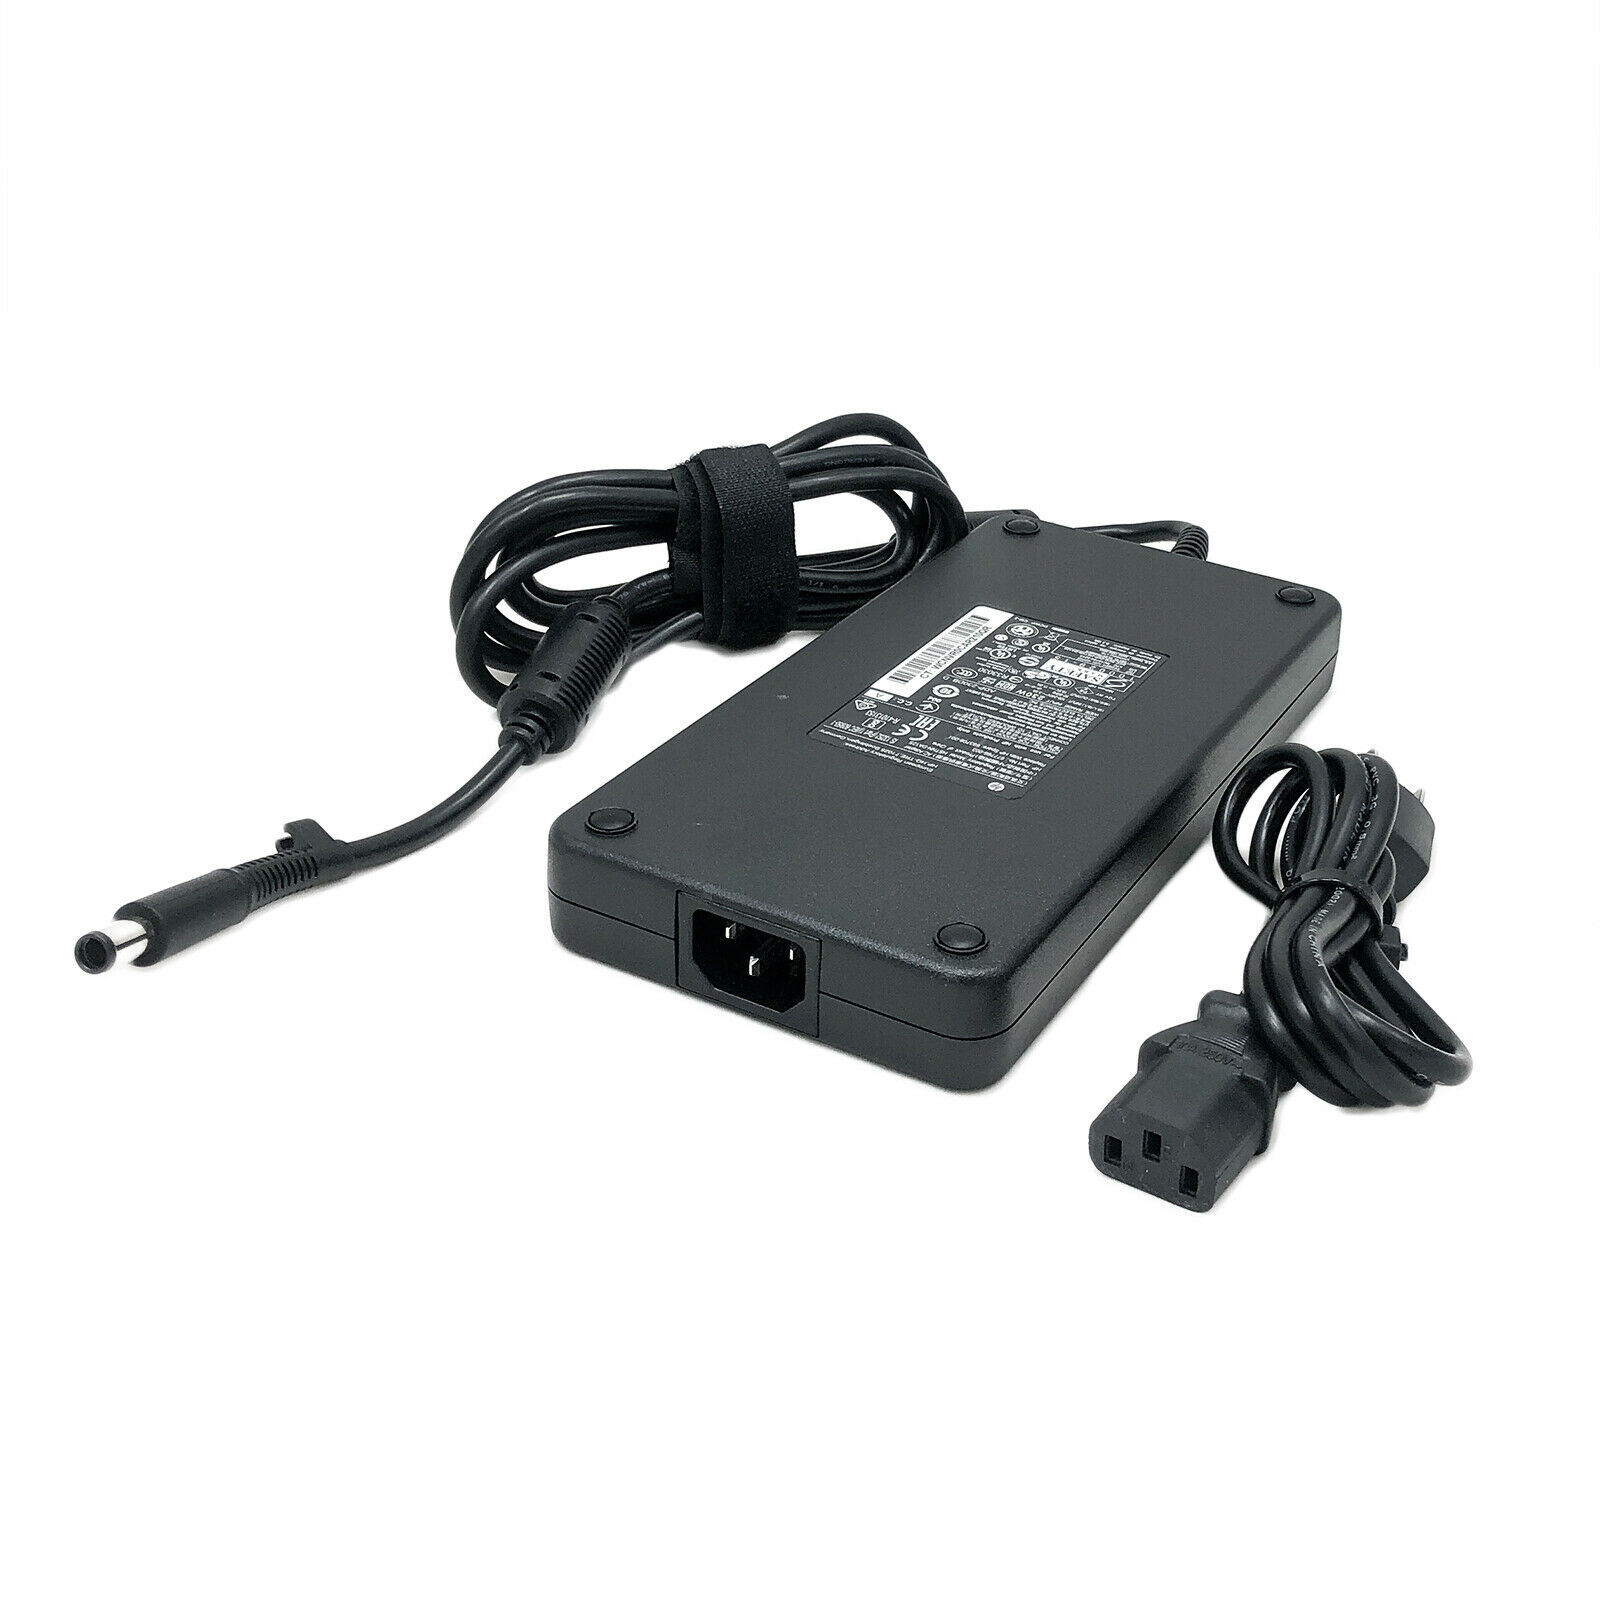 NEW Genuine HP 230W AC Power Adapter With Cord 19.5V 11.8A 677766-003 817911-001